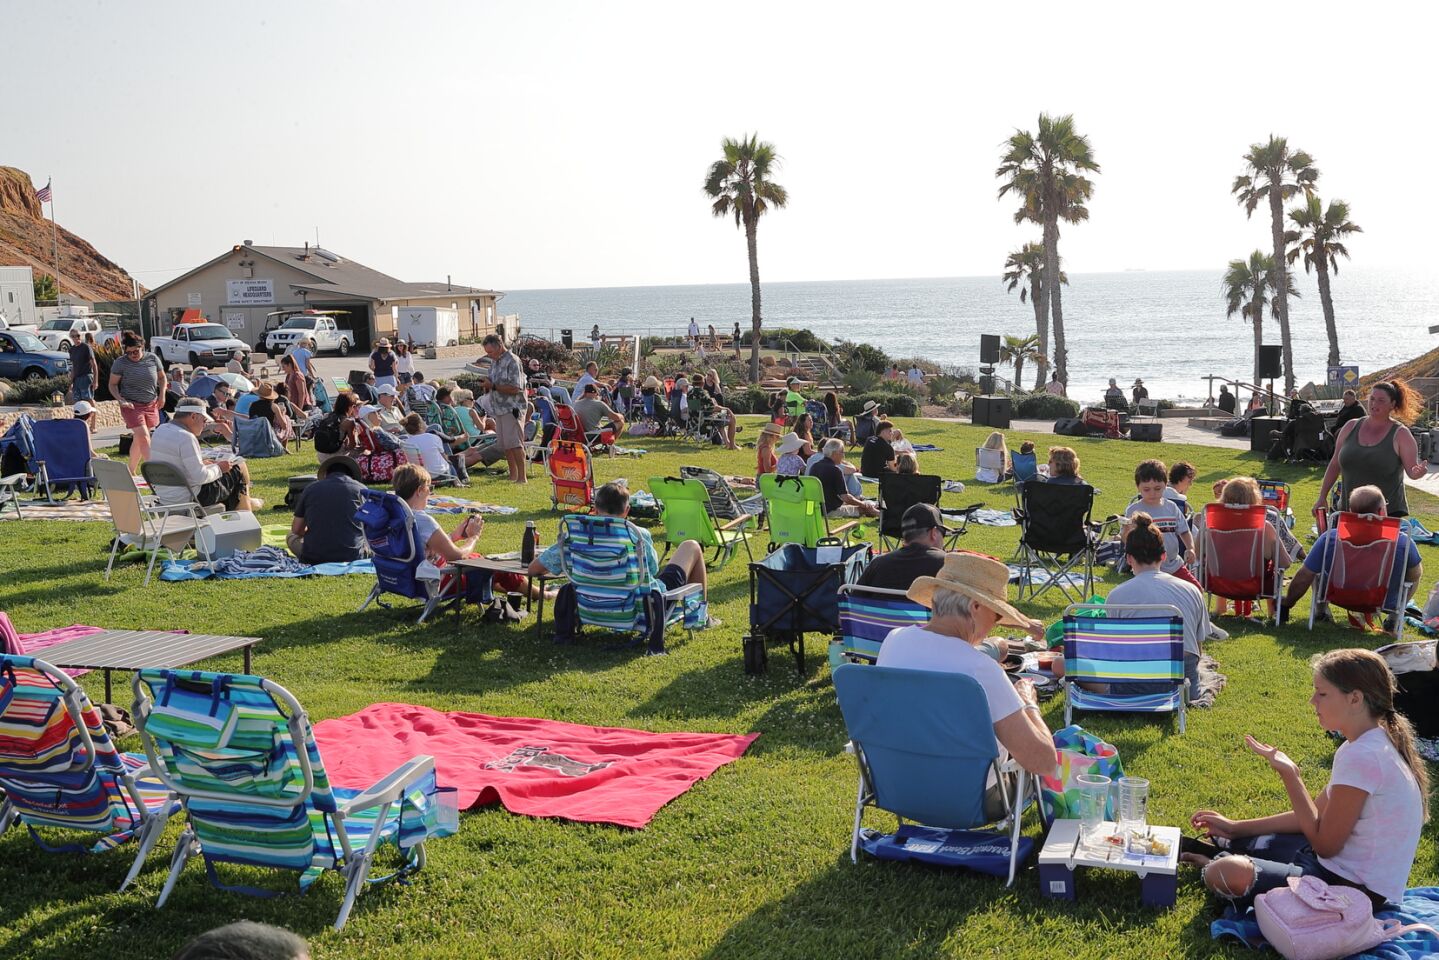 The crowd gathers before the summer concert at Fletcher Cove